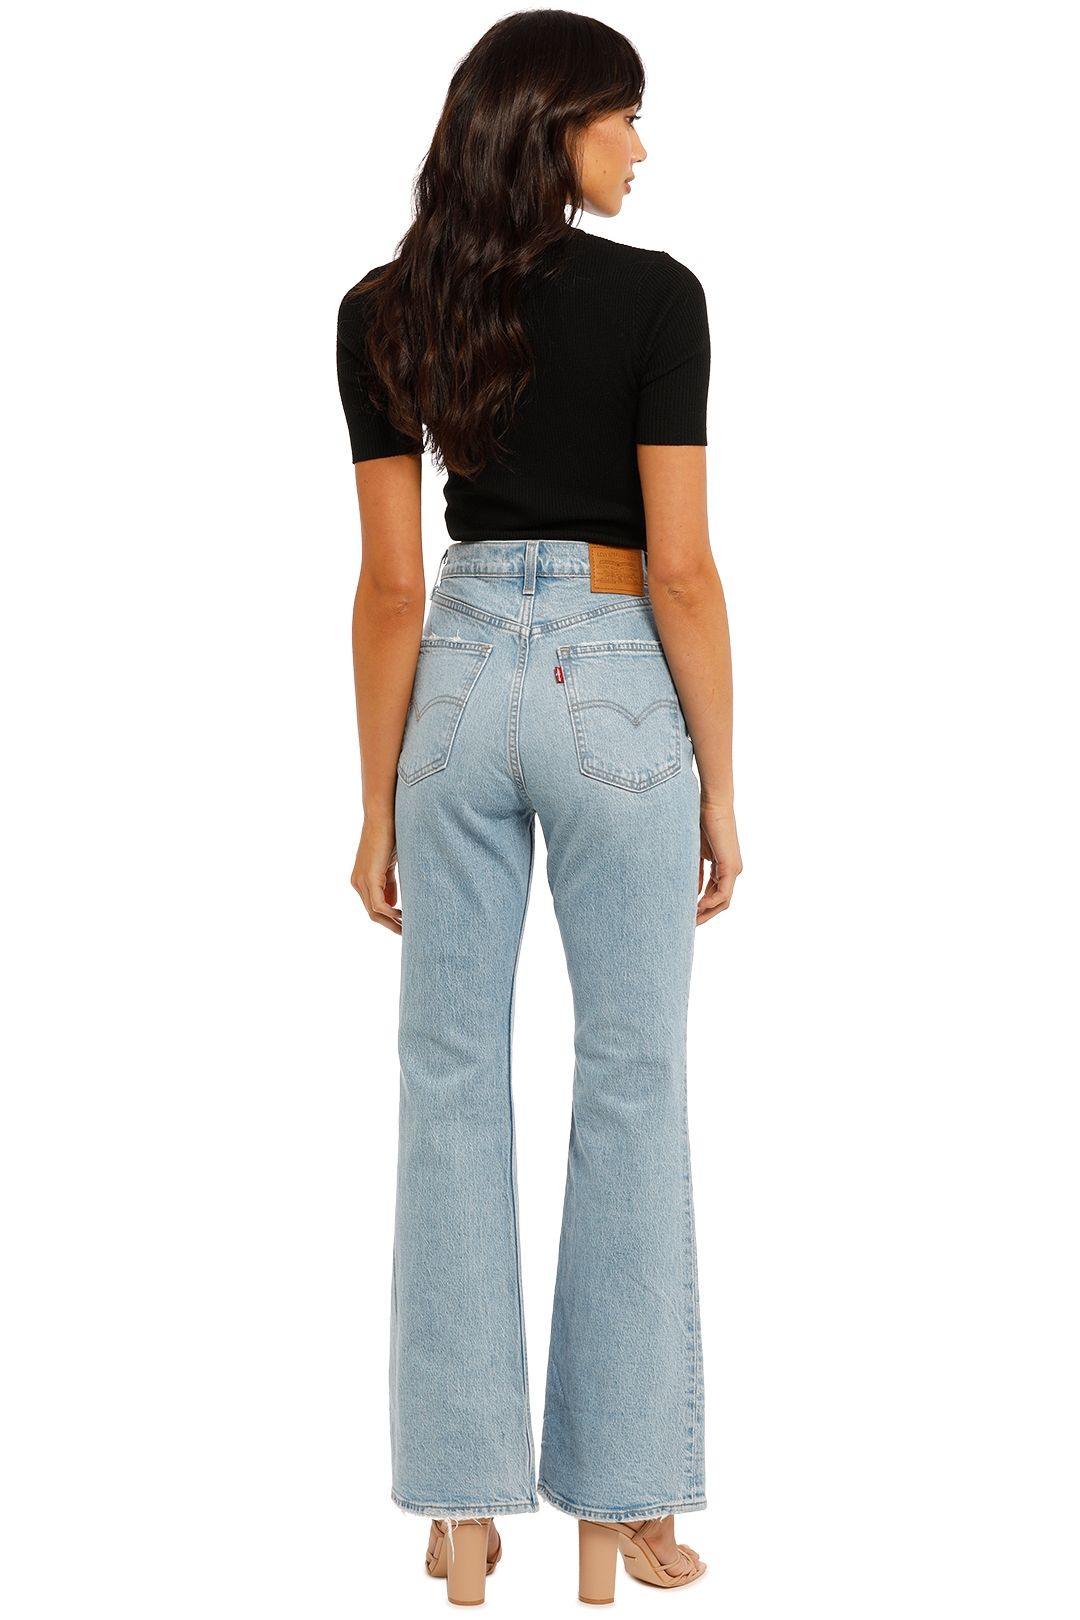 Levi's 70'S High Flare